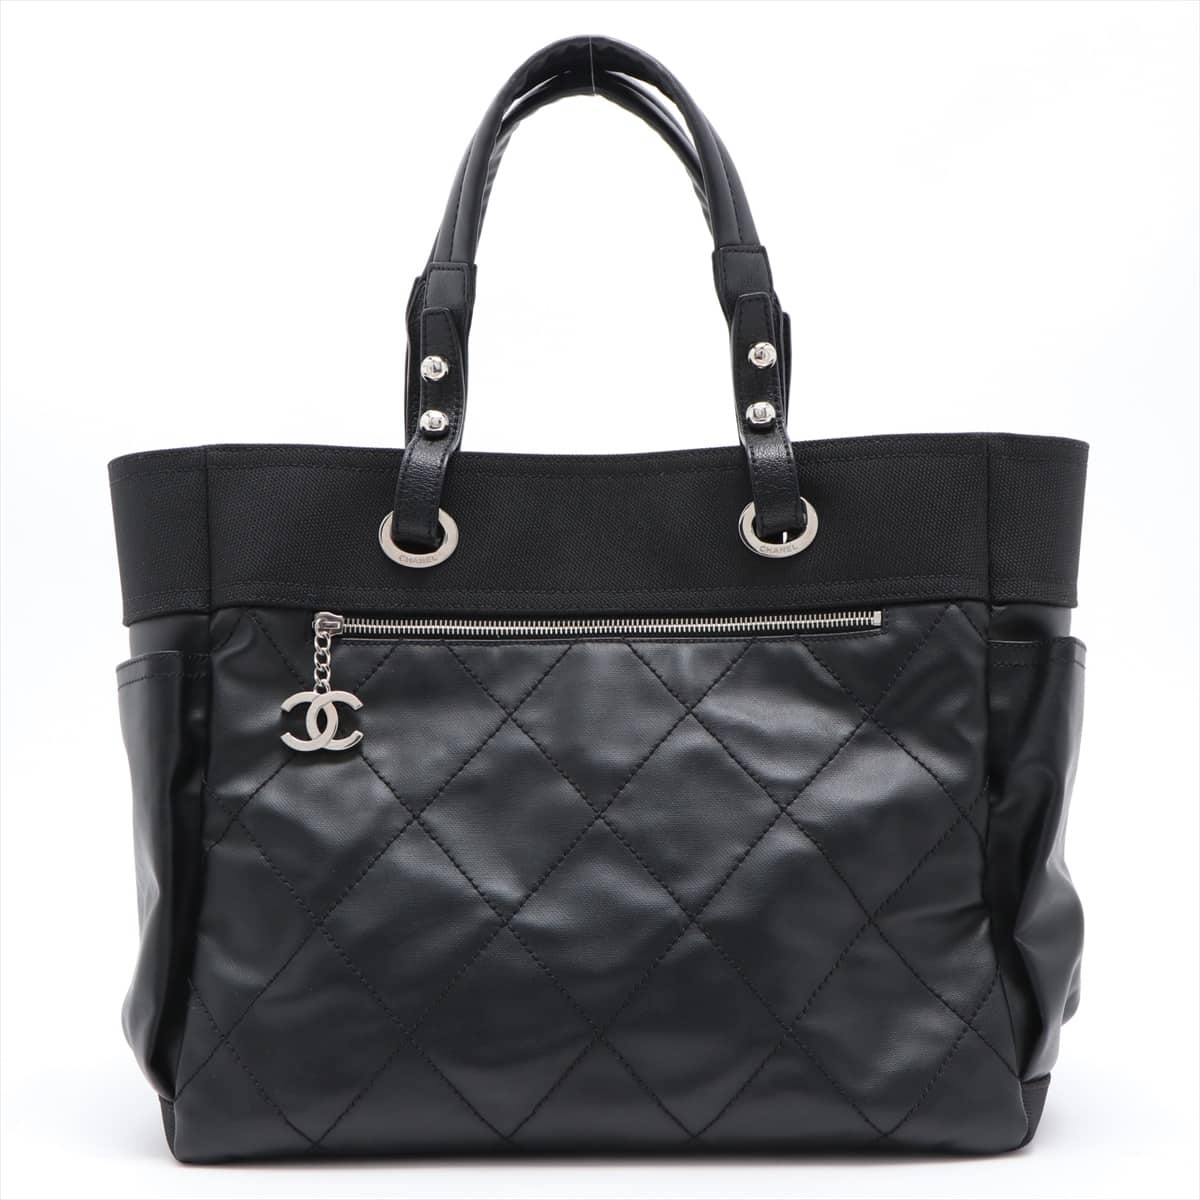 Chanel Paris Biarritz GM Coating canvas Tote bag Black Silver Metal fittings 16XXXXXX with pouch